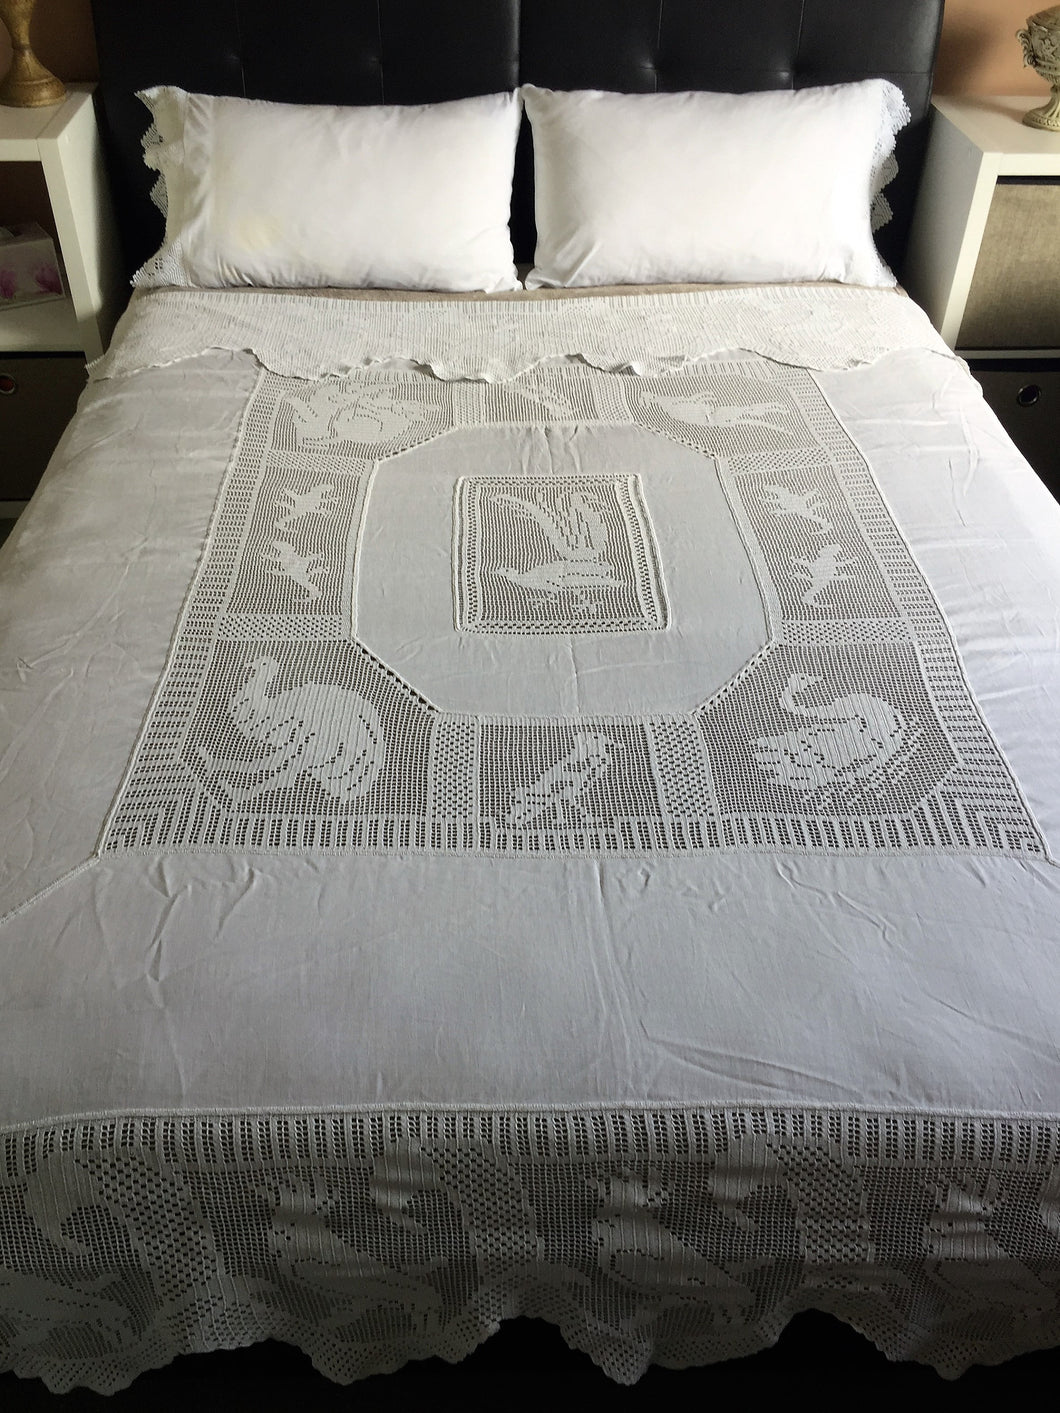 Antique Irish Lace and Linen Bed Cover with Mary Card Designed Filet Crochet Inlays and Edging 